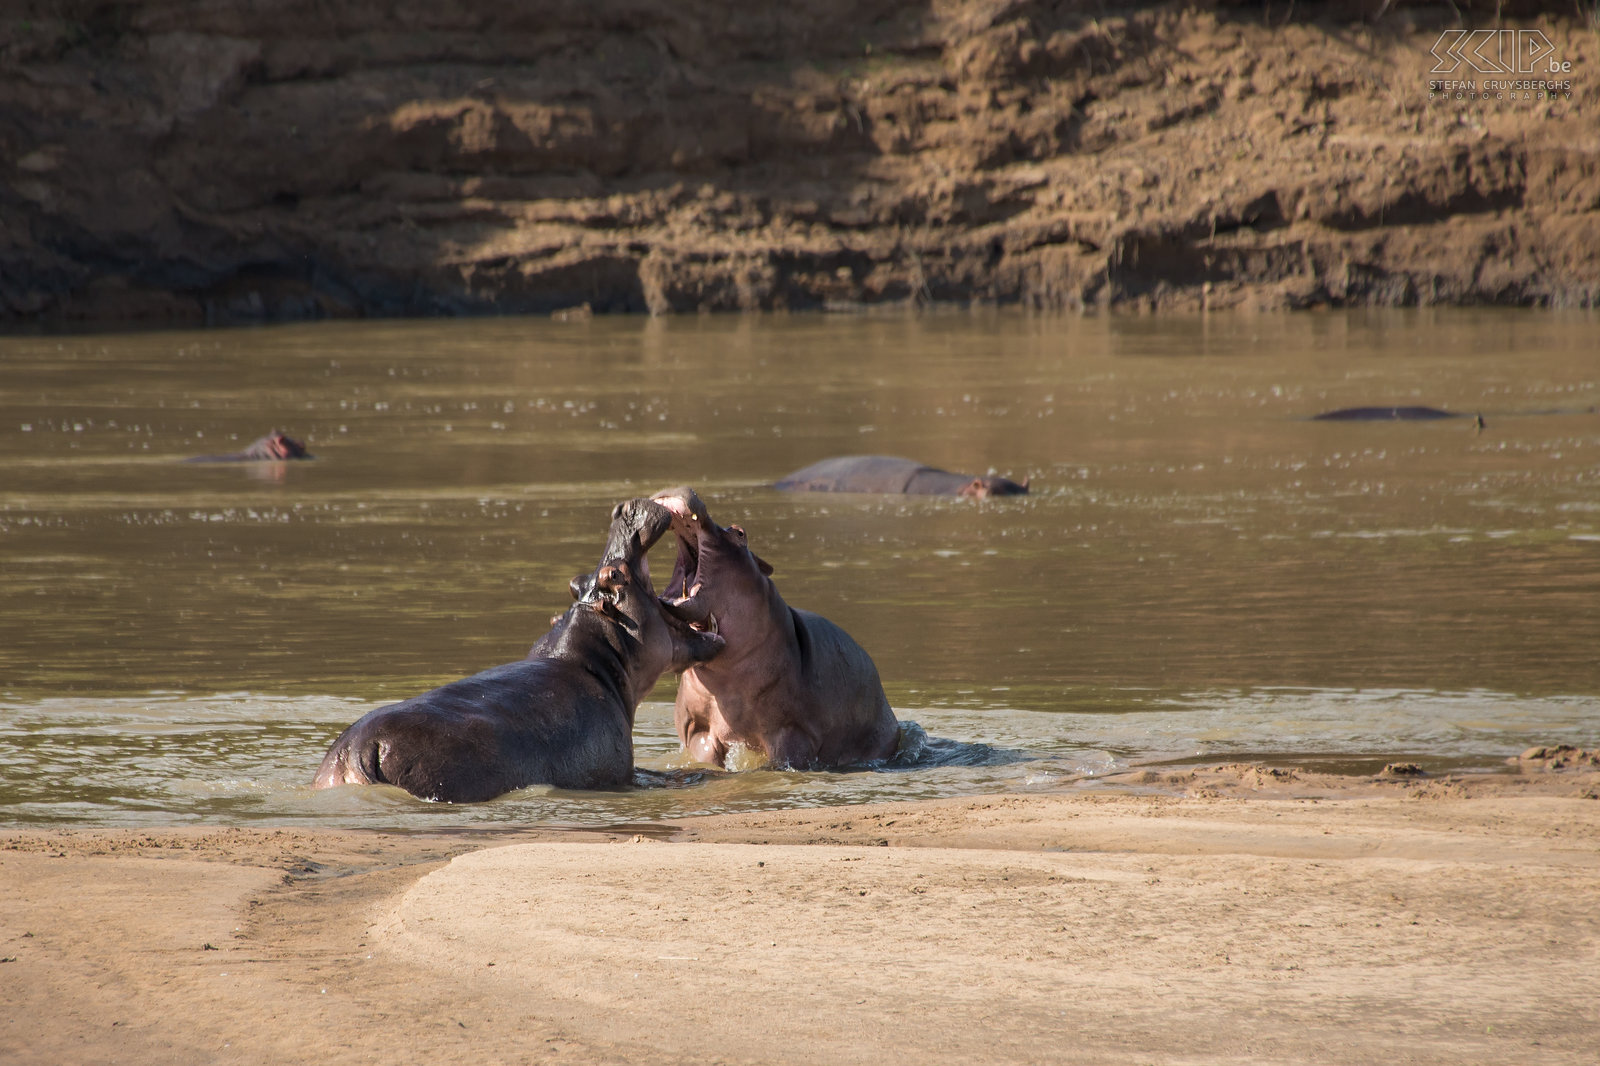 South Luangwa - Fighting hippos Just in front of our tent at the lodge entire groups of hippos (Hippopotamus amphibius) could be seen in the river. During one afternoon two giants suddenly started to fight each other for one hour. Hippos can weigh 2 to 3 tons. When fighting male hippos use their incisors to block each other's attacks and their large canines to injure their opponent. Africa at its best Stefan Cruysberghs